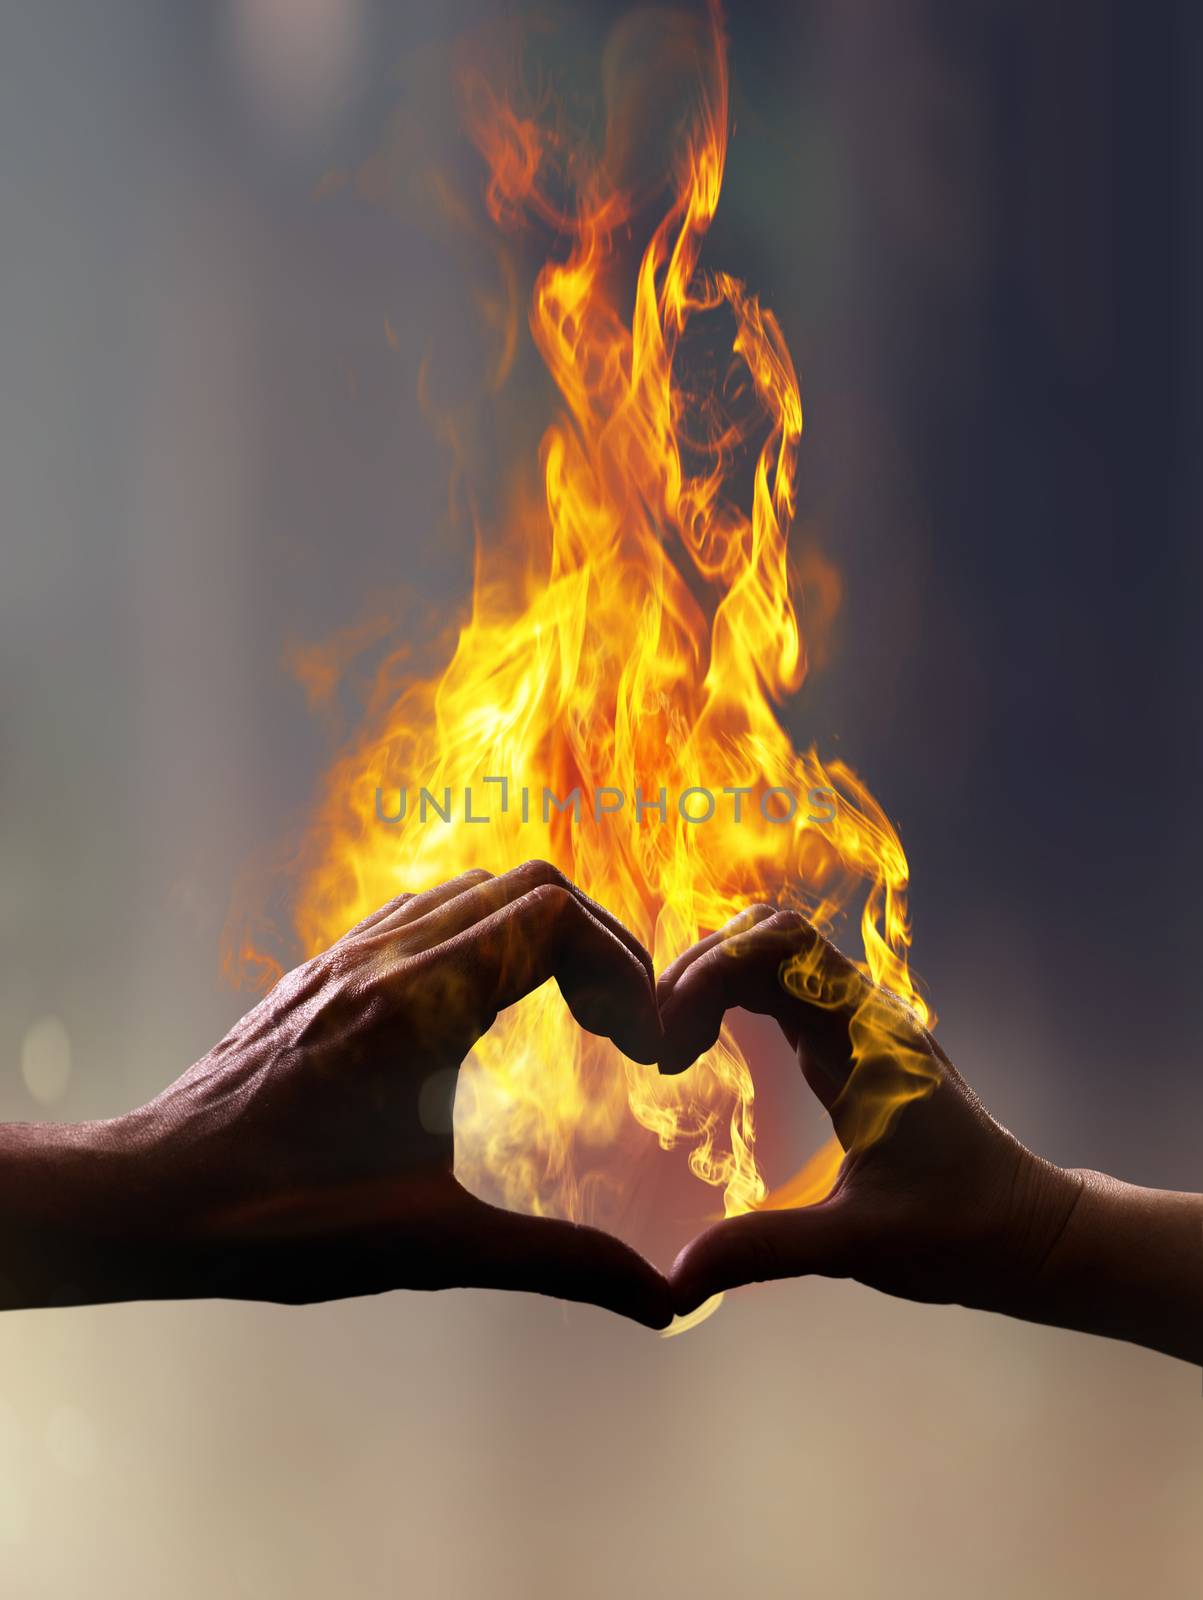 Silhouette of hands with fire in form of heart when sweethearts have touched